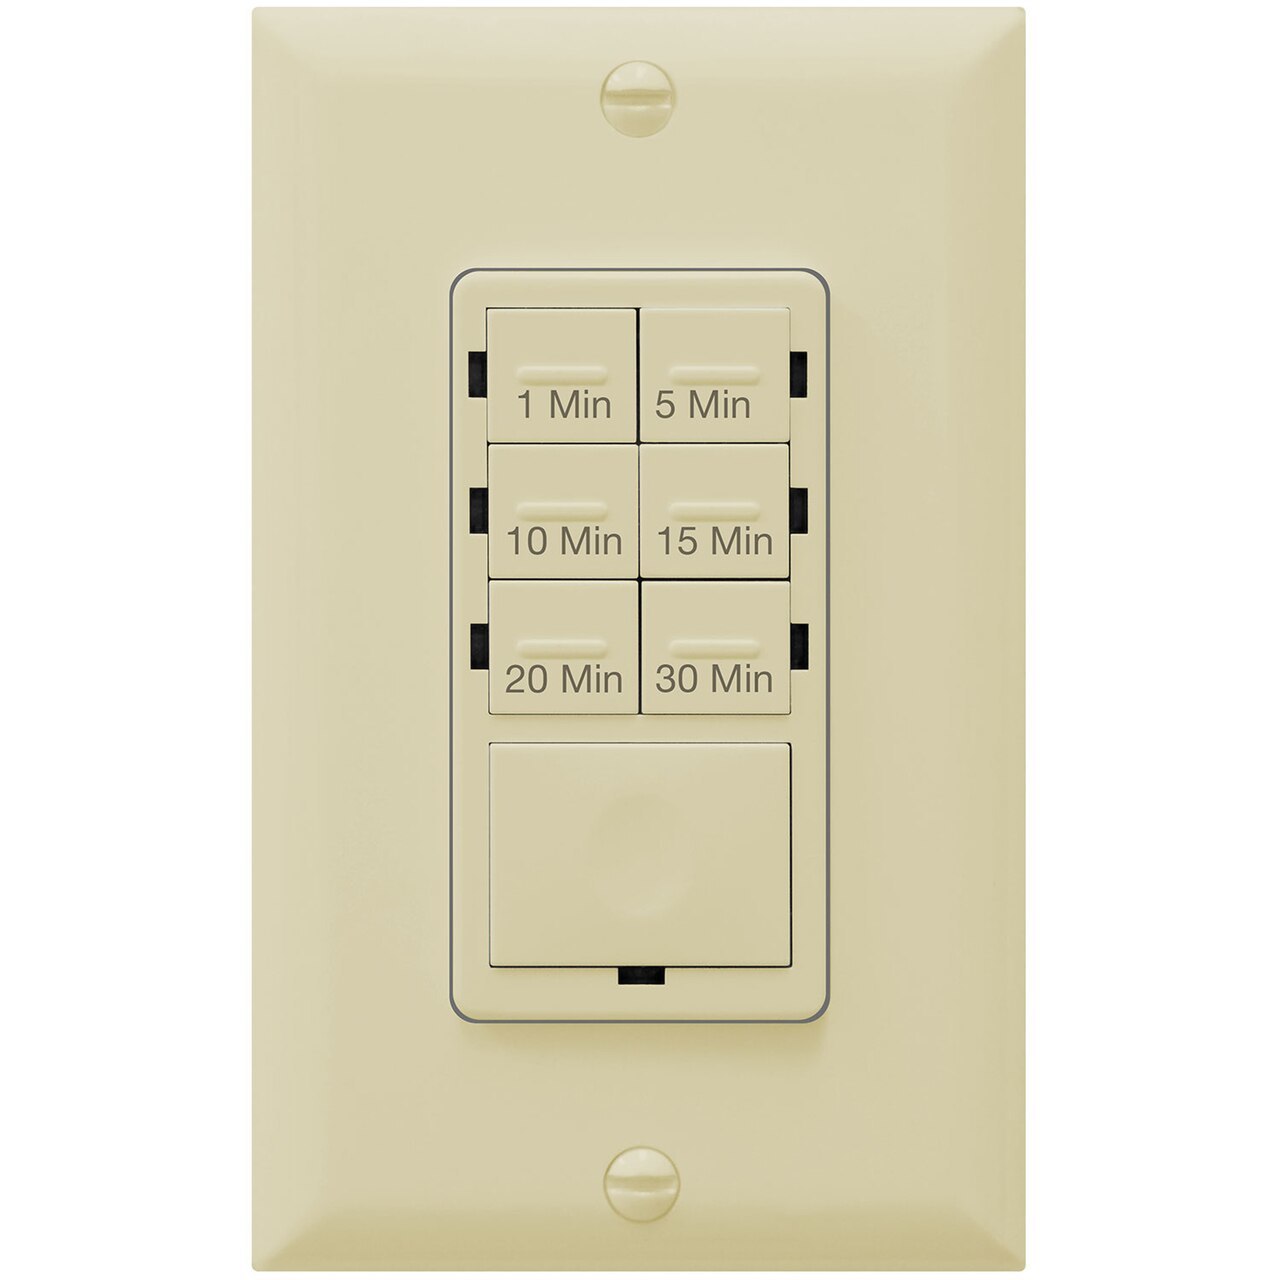 Countdown Timer Switch for bathroom fans and household lights, 1-5-10-15-20-30 Min Settings with Manual Override, Always On Blue LED, Neutral Wire Required, Ivory Four Bros Lighting